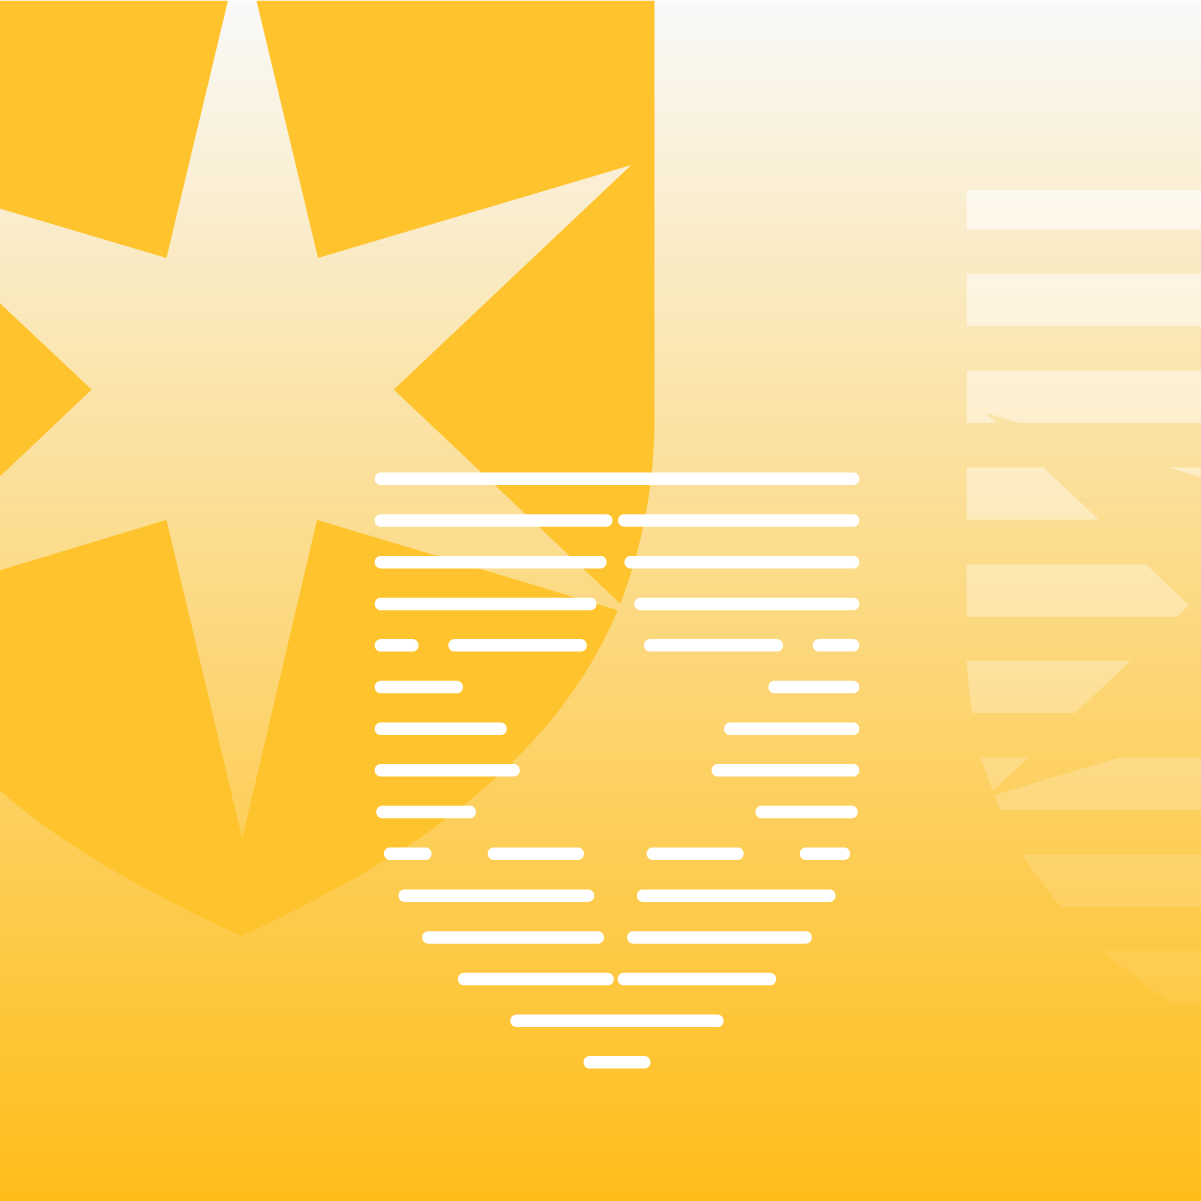 An illustration featuring symbols of the Morningstar Medalist Ratings on a yellow background.